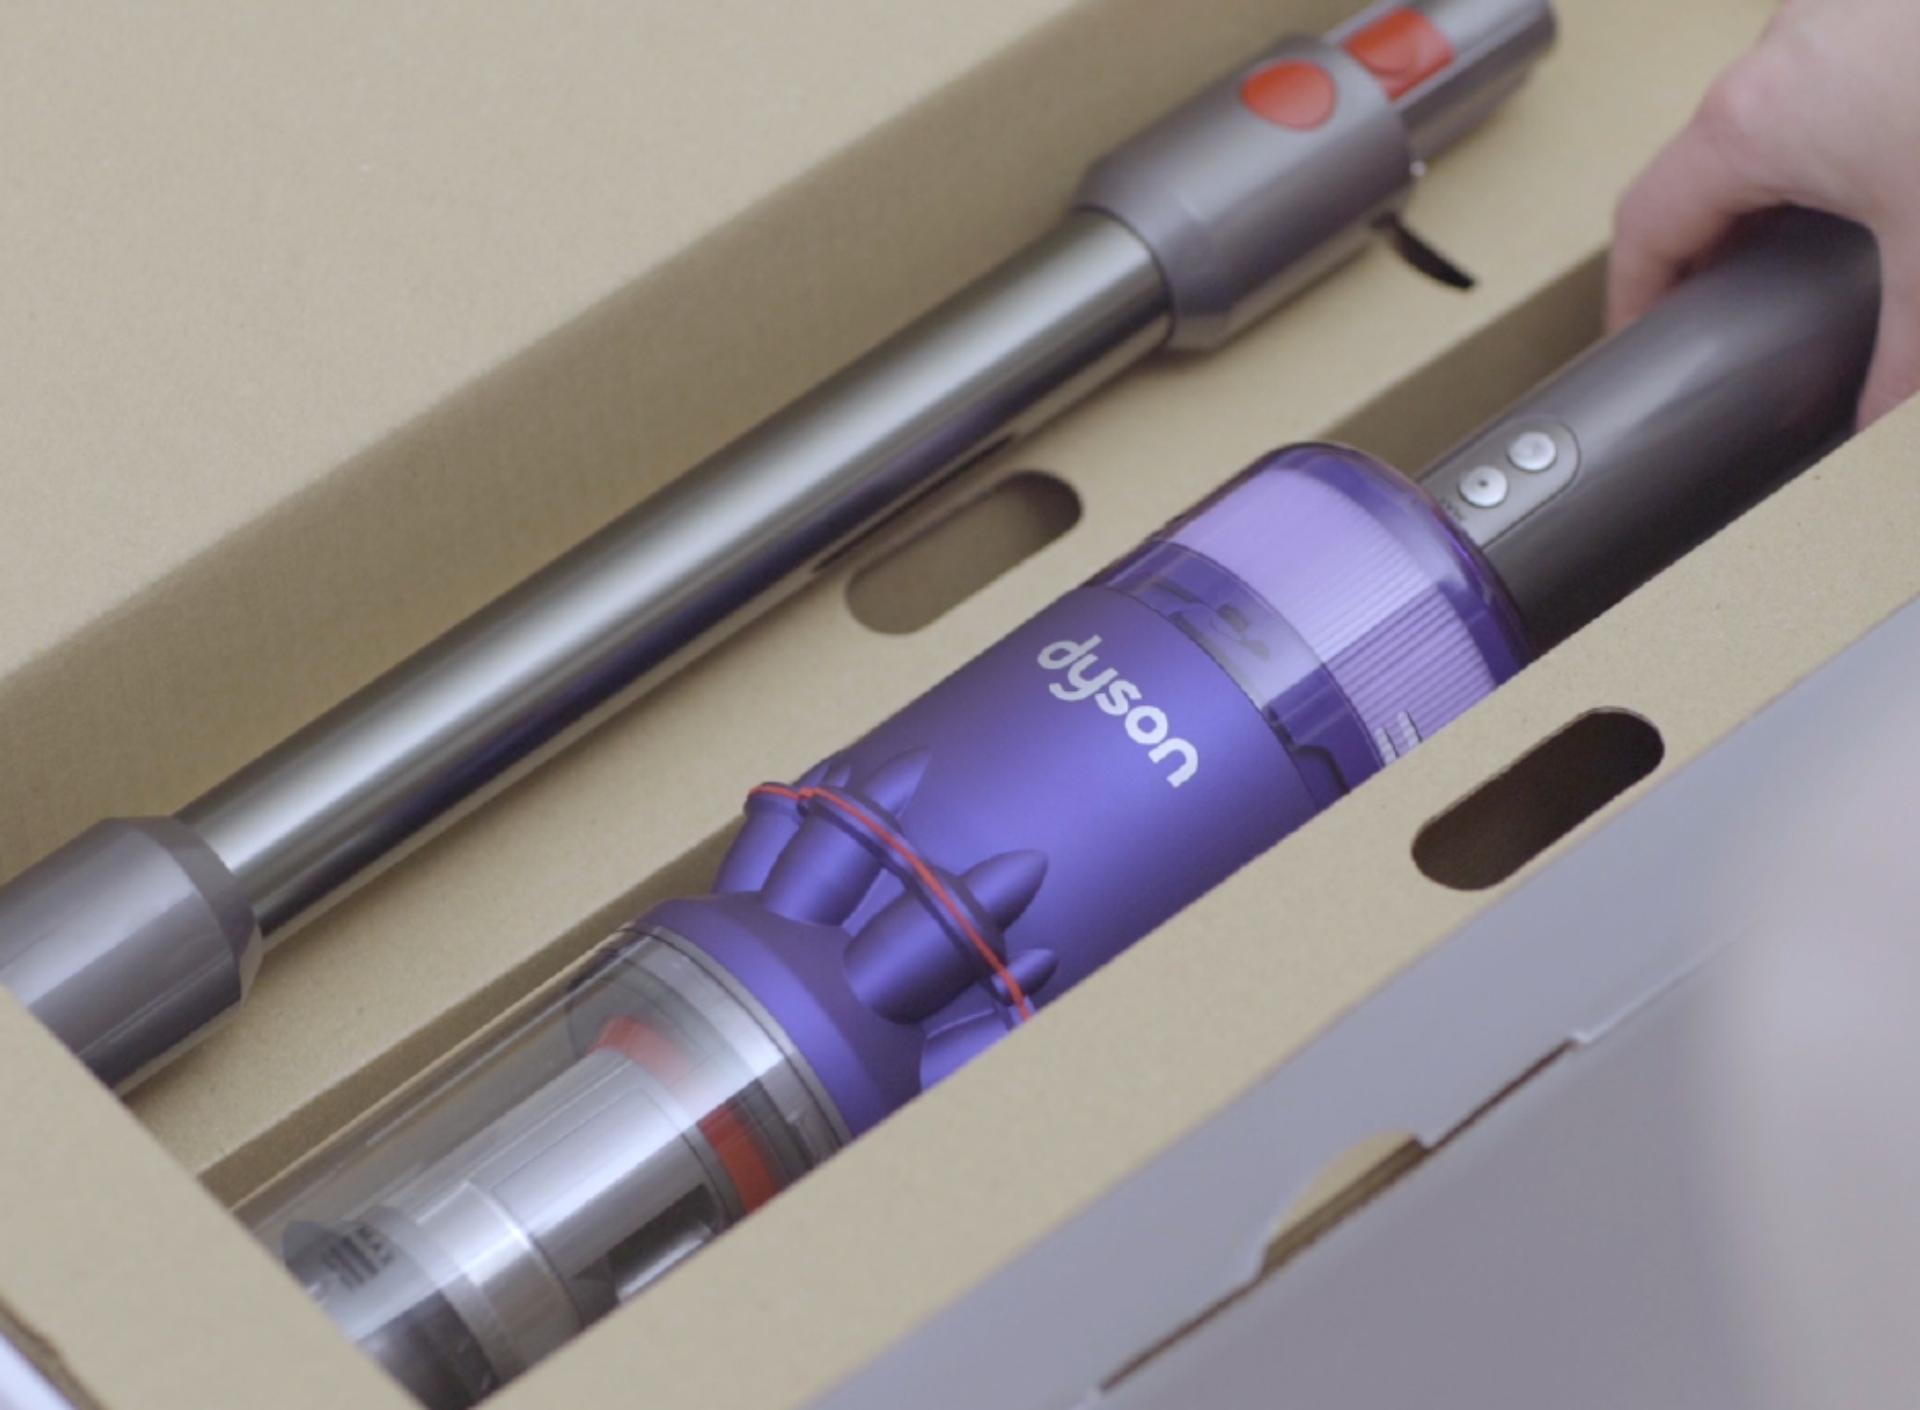 Video showing how to get started with the Dyson Omni-glide vacuum.